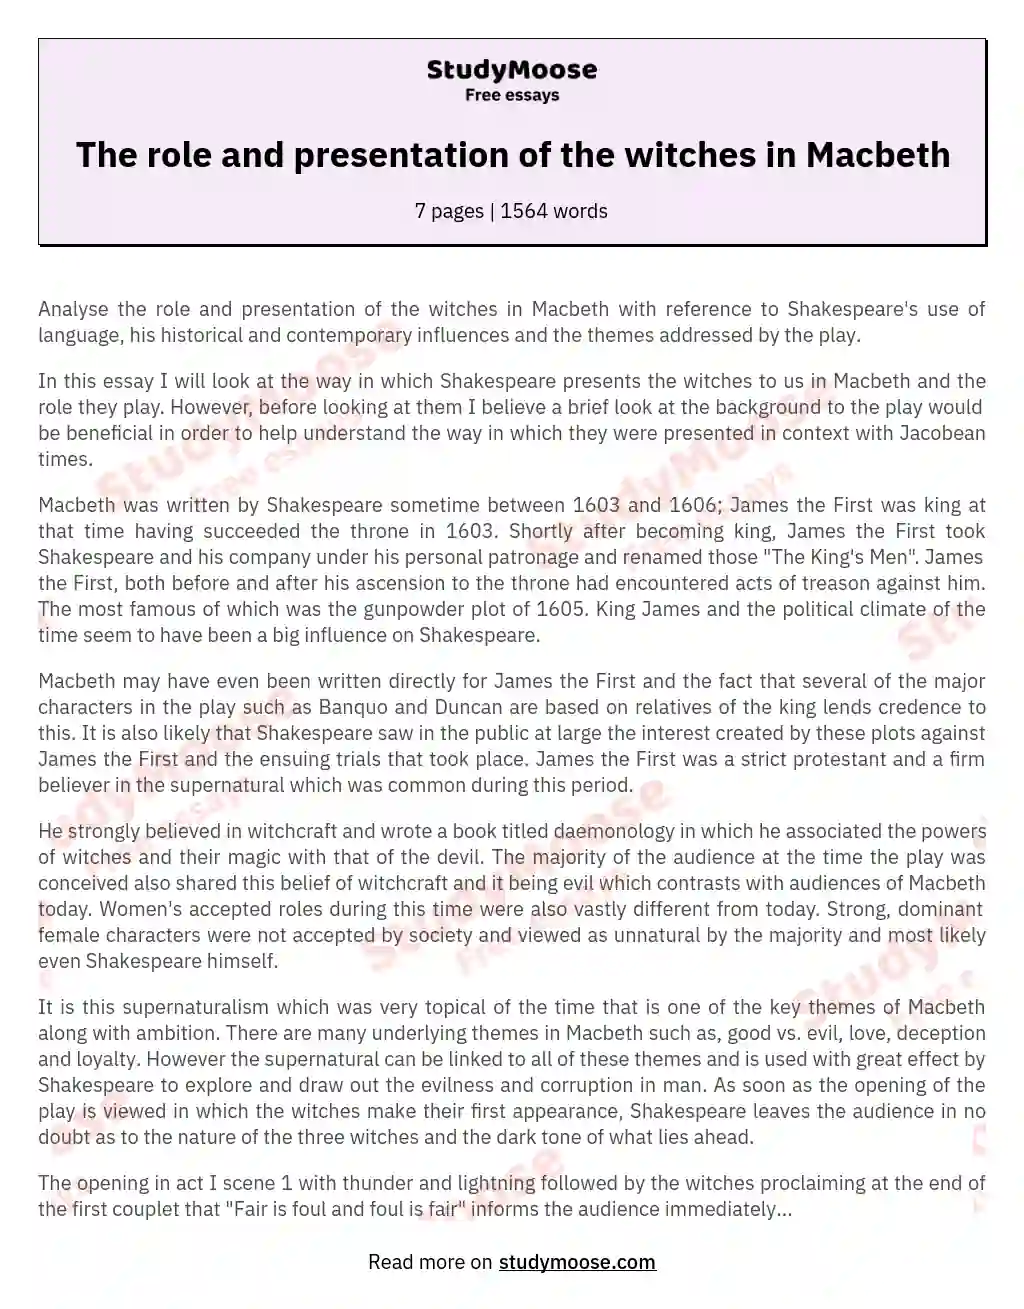 The role and presentation of the witches in Macbeth essay